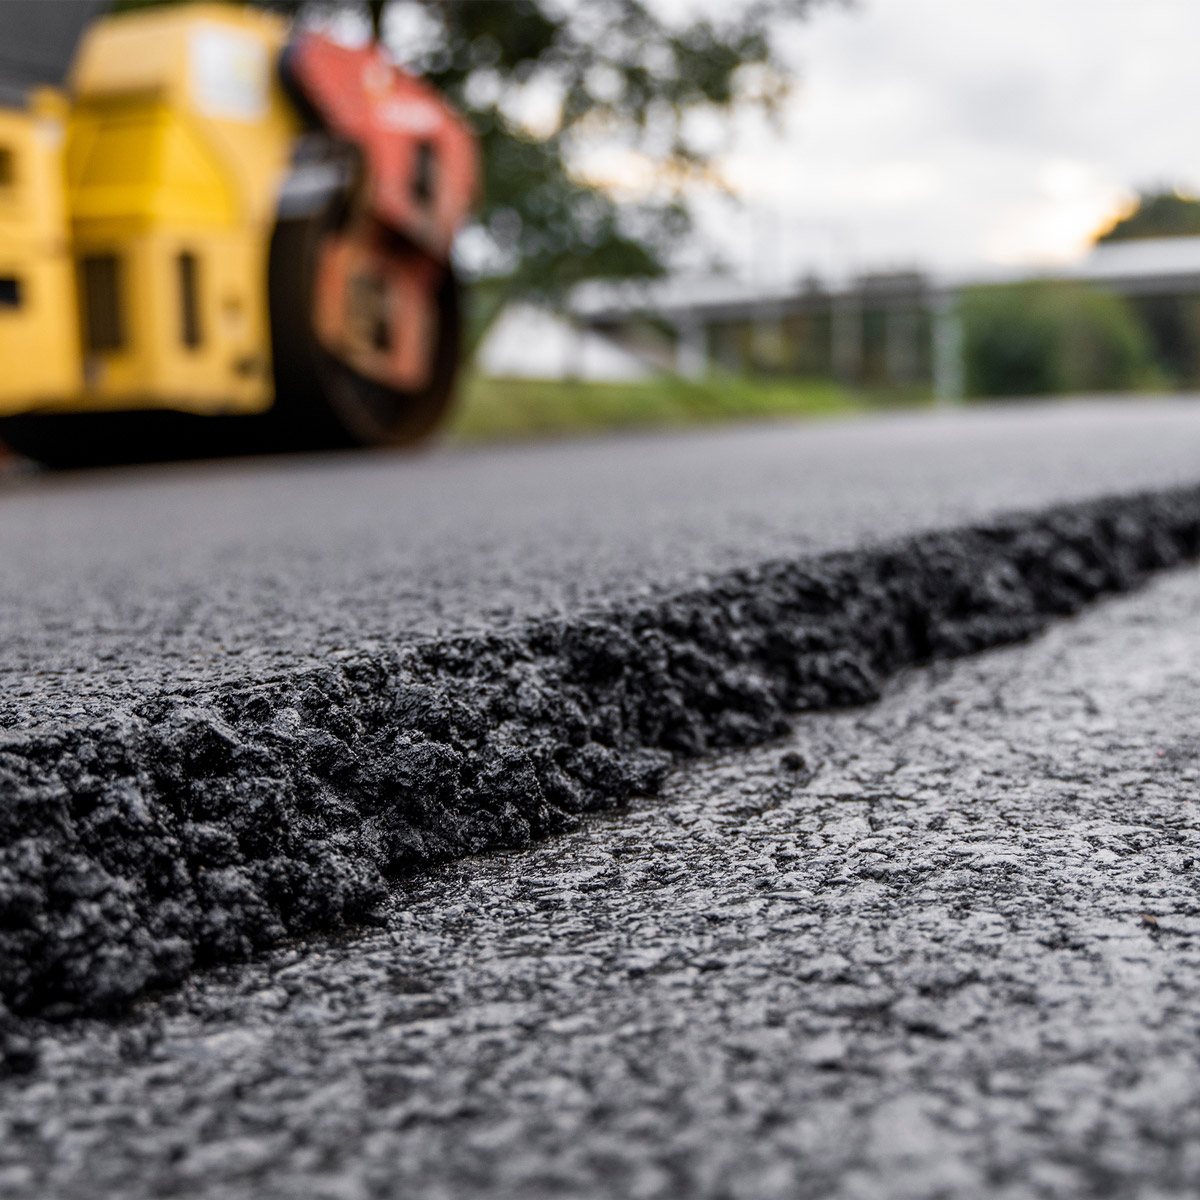 close up image of pavement during road milling work